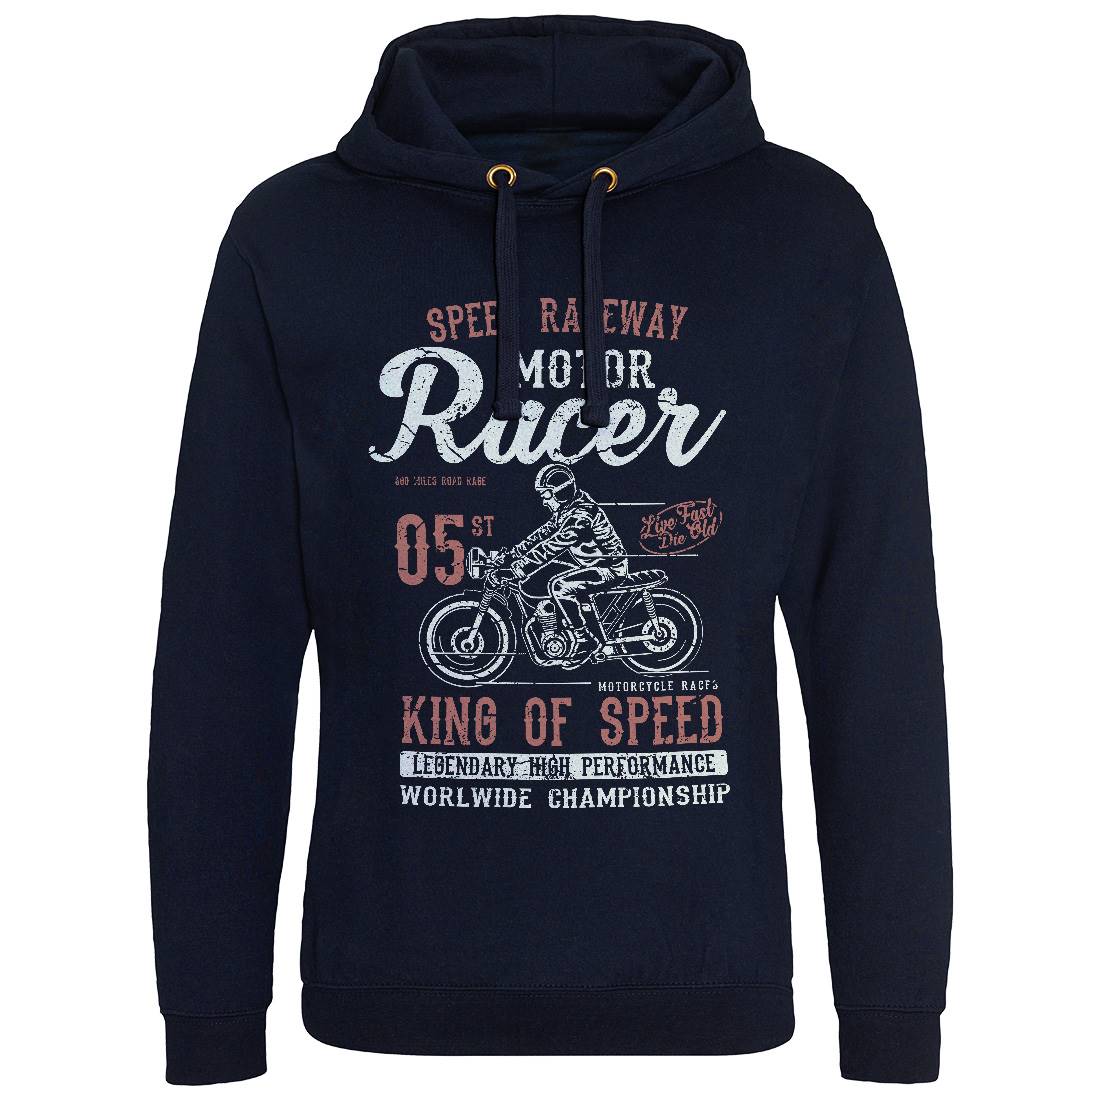 Motor Racer Mens Hoodie Without Pocket Motorcycles A091